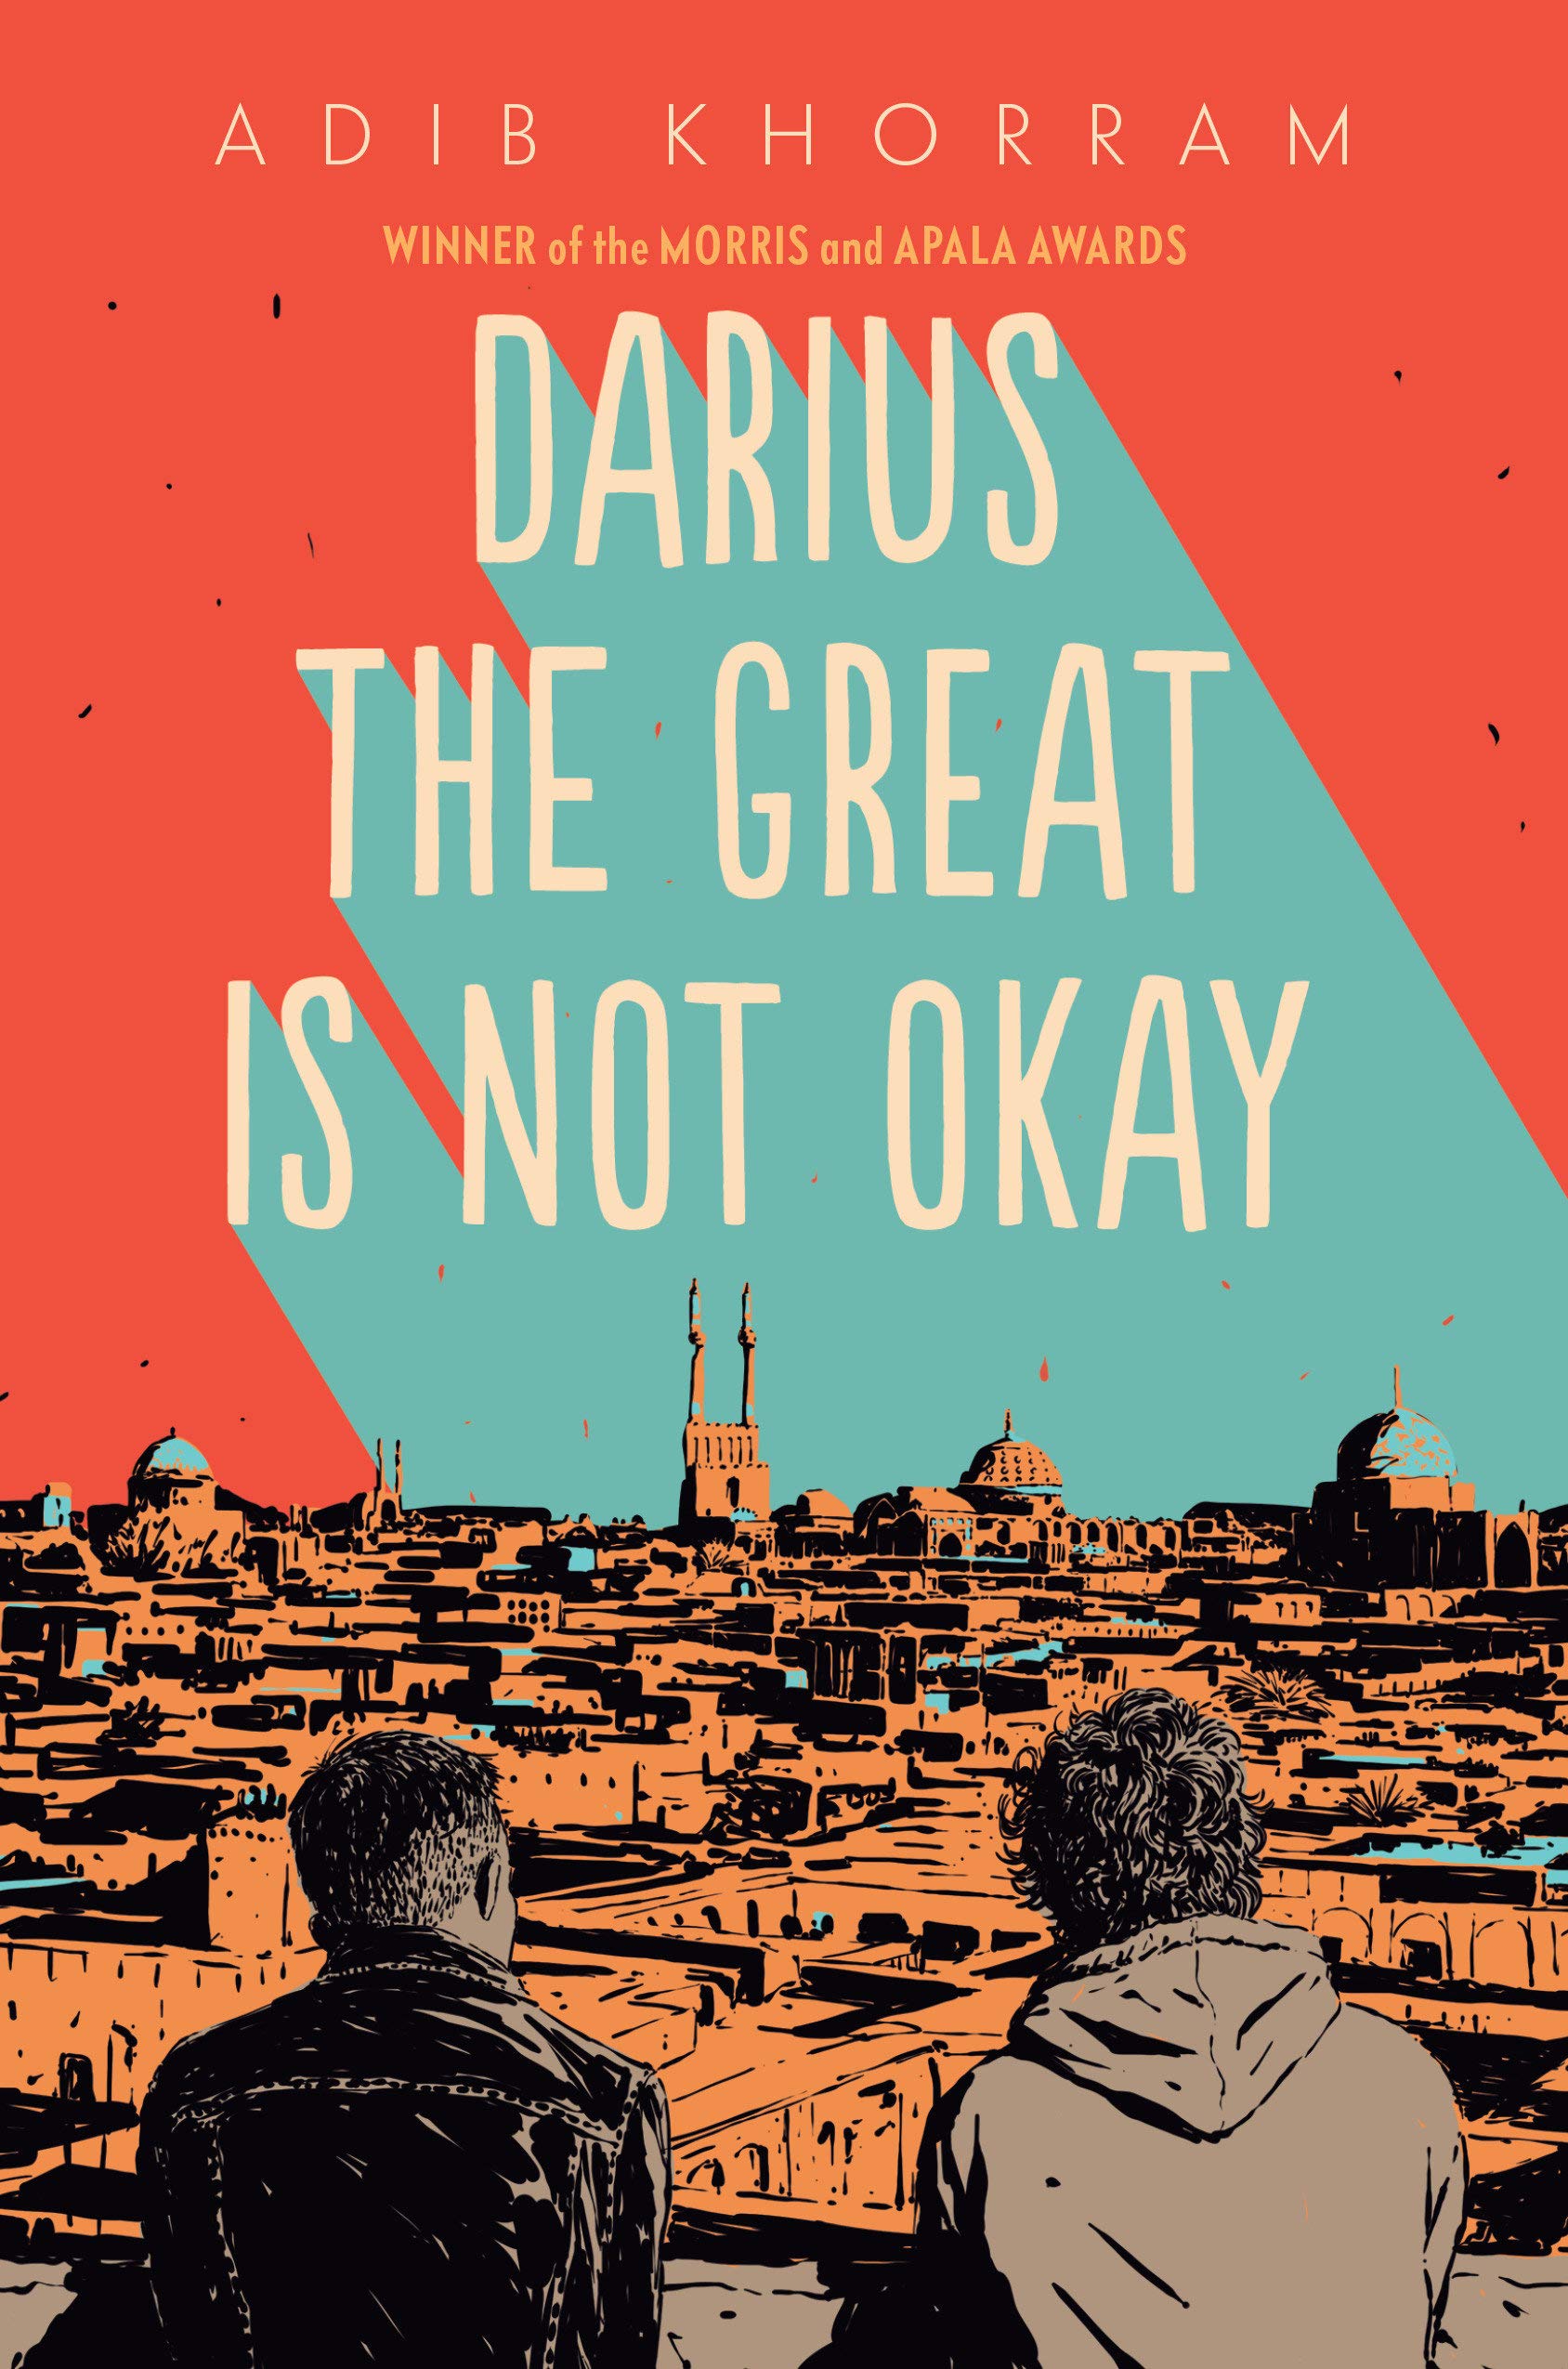 Illustration of two young men sitting and looking out over a city landscape in black and yellow. White text on blue reads "Darius the Great is Not Okay" on a red background on the upper half of the book cover.